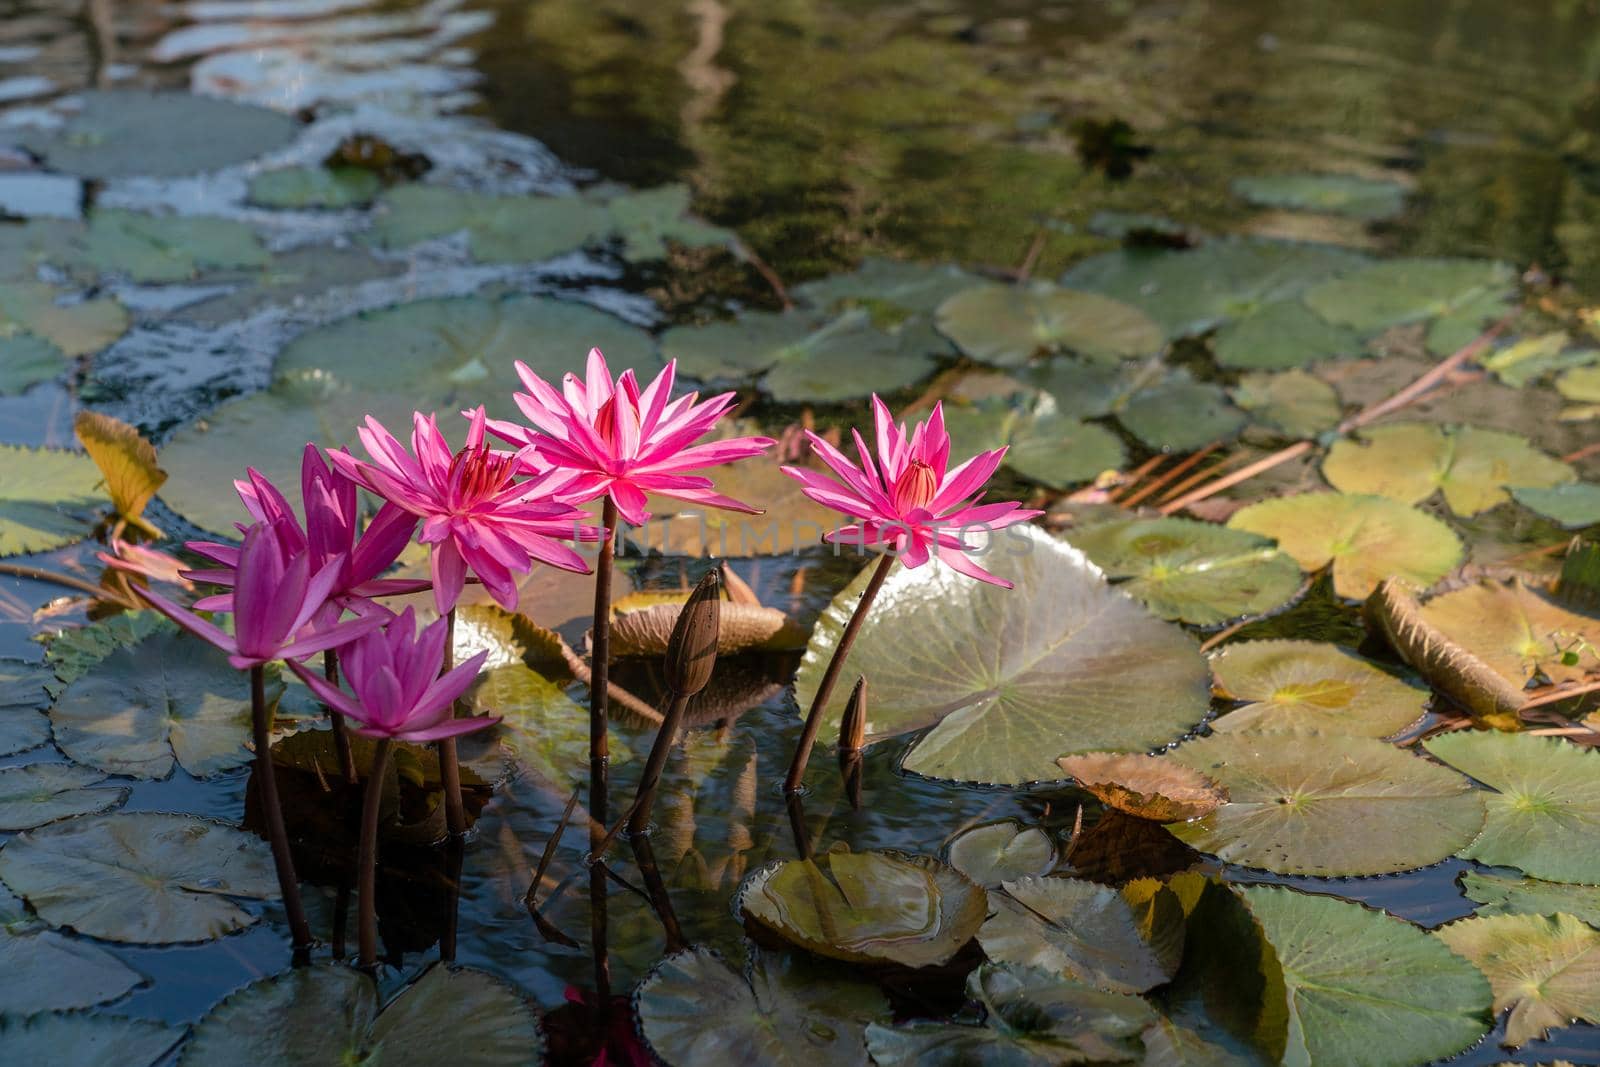 Group of pink waterlily or lotus flower in pond. by sirawit99